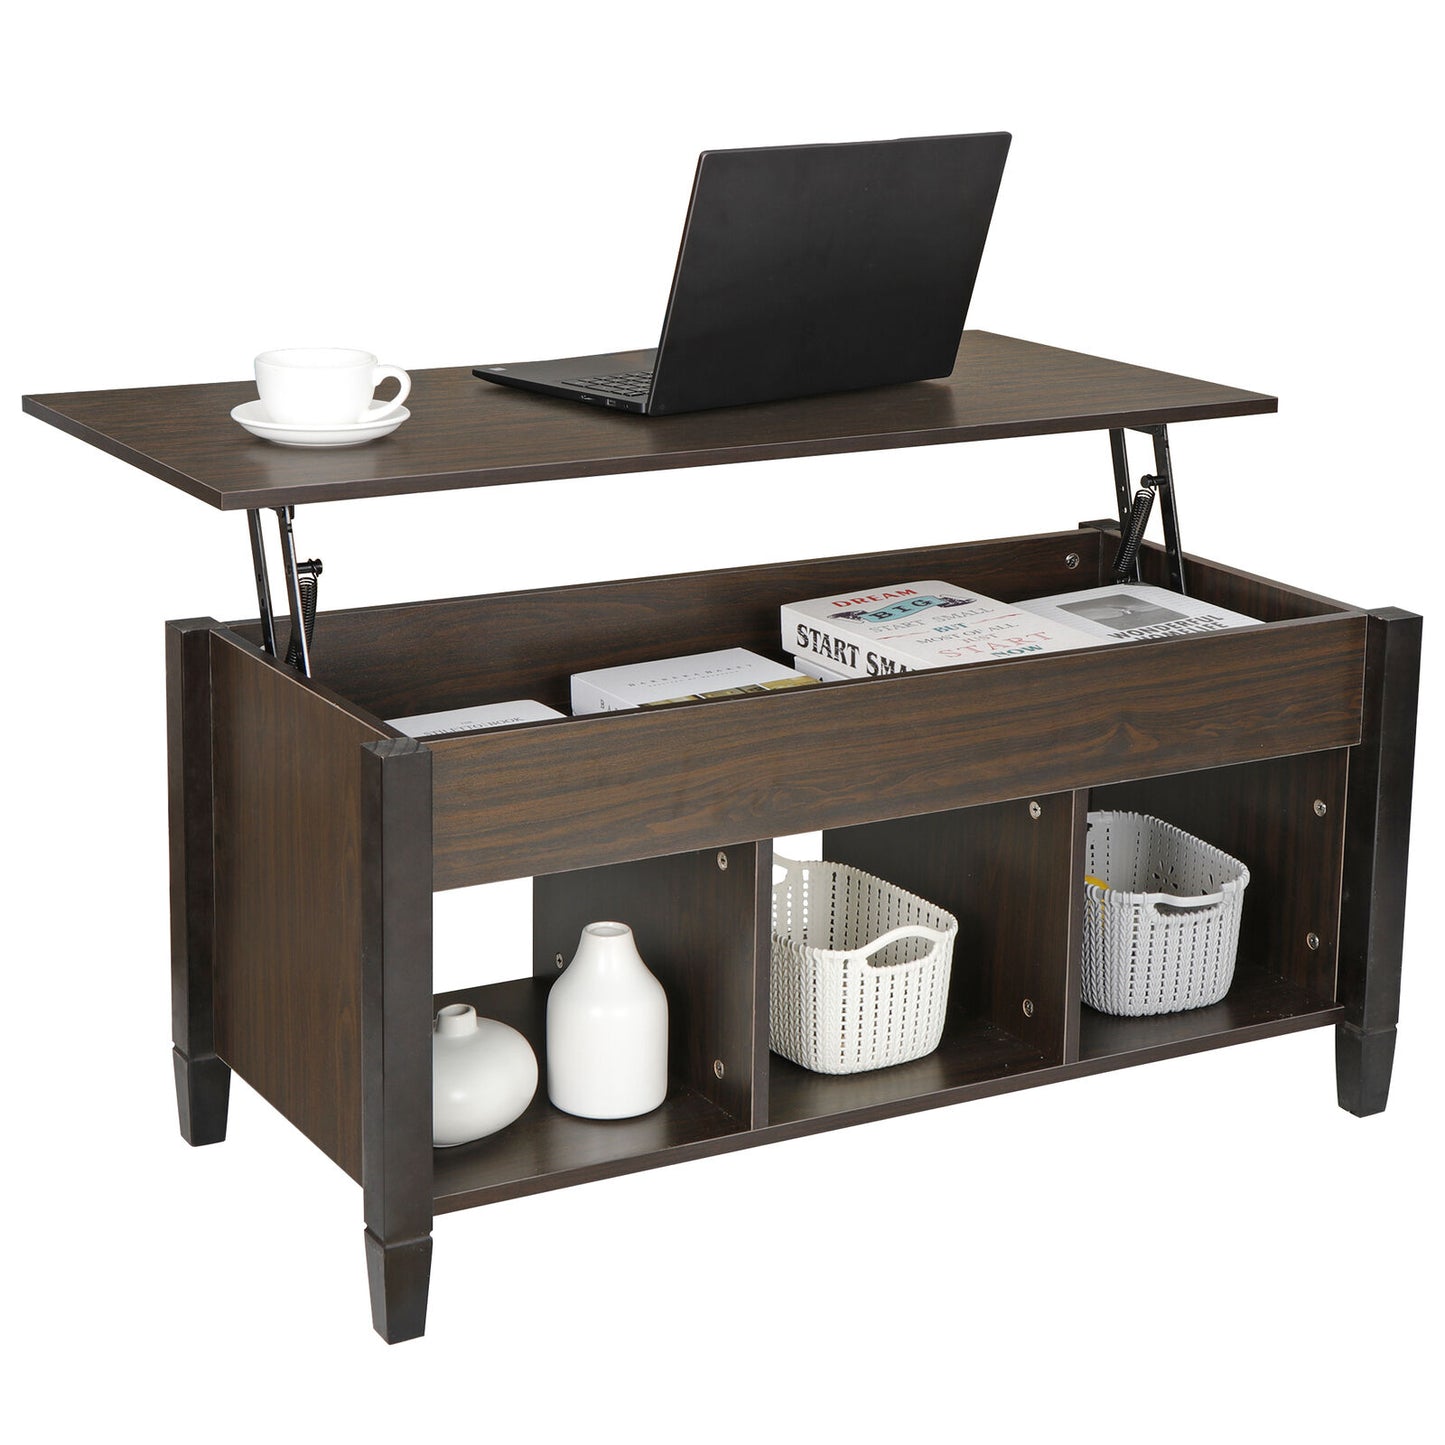 Lift Top Coffee Table with Hidden Storage Compartment Shelf Tabletop Table